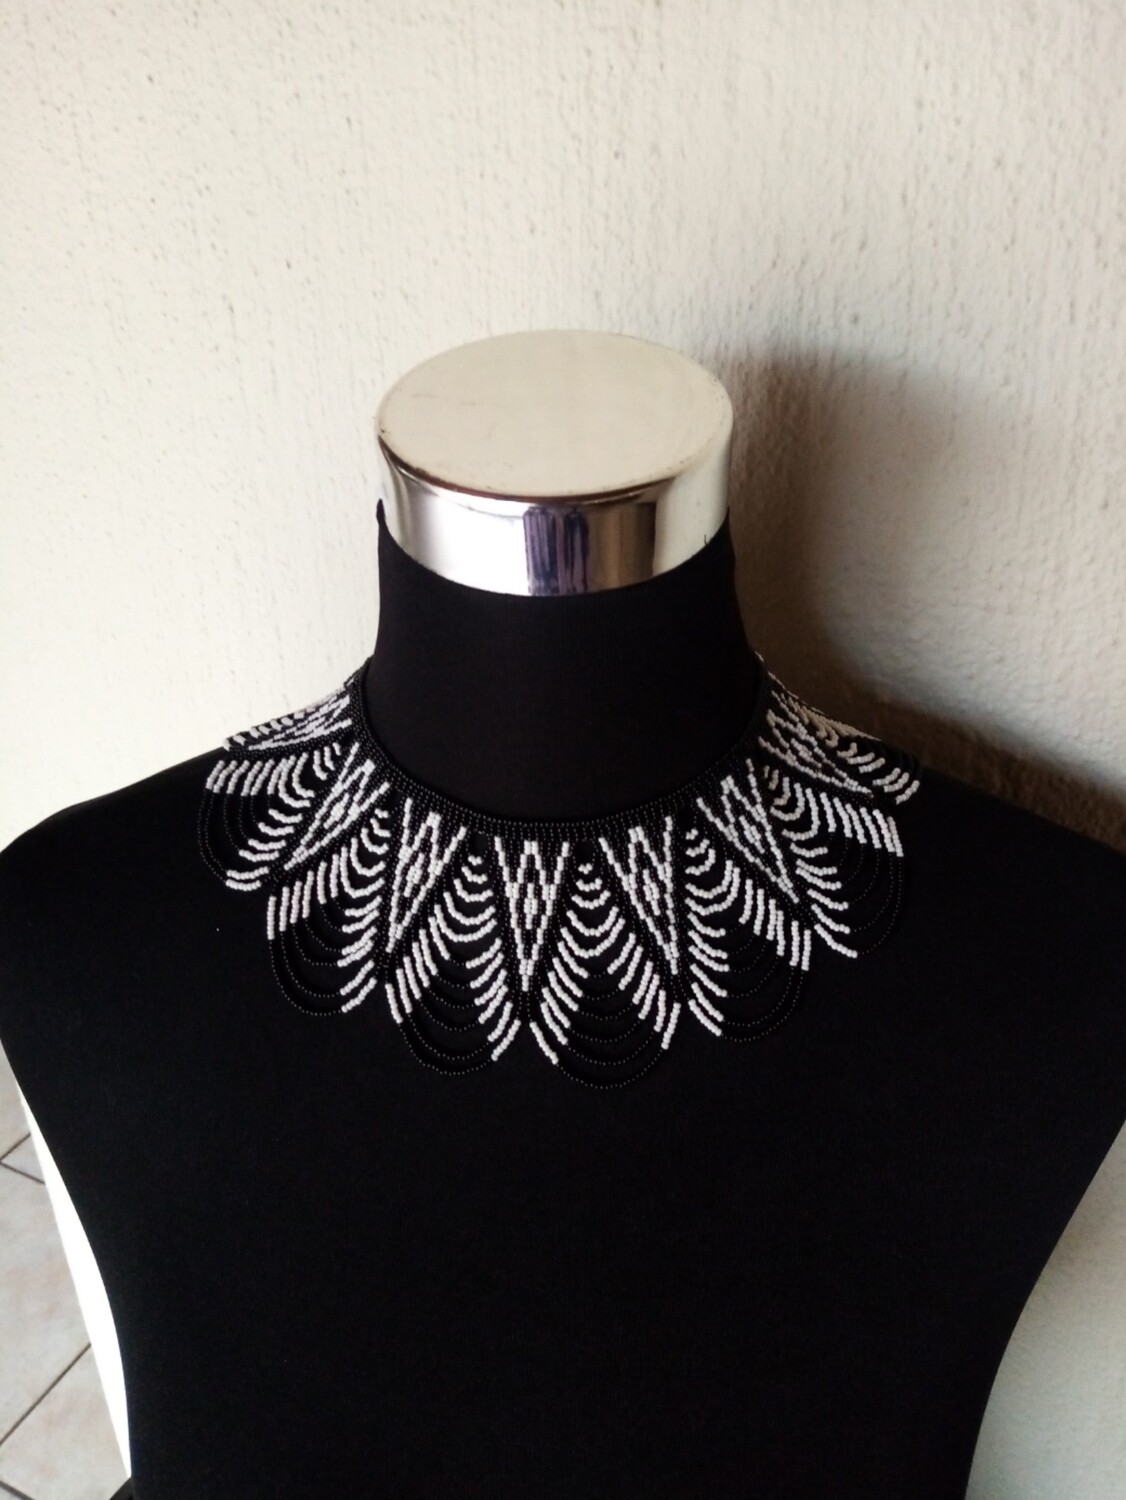 "The Black and White Rose" beaded collar